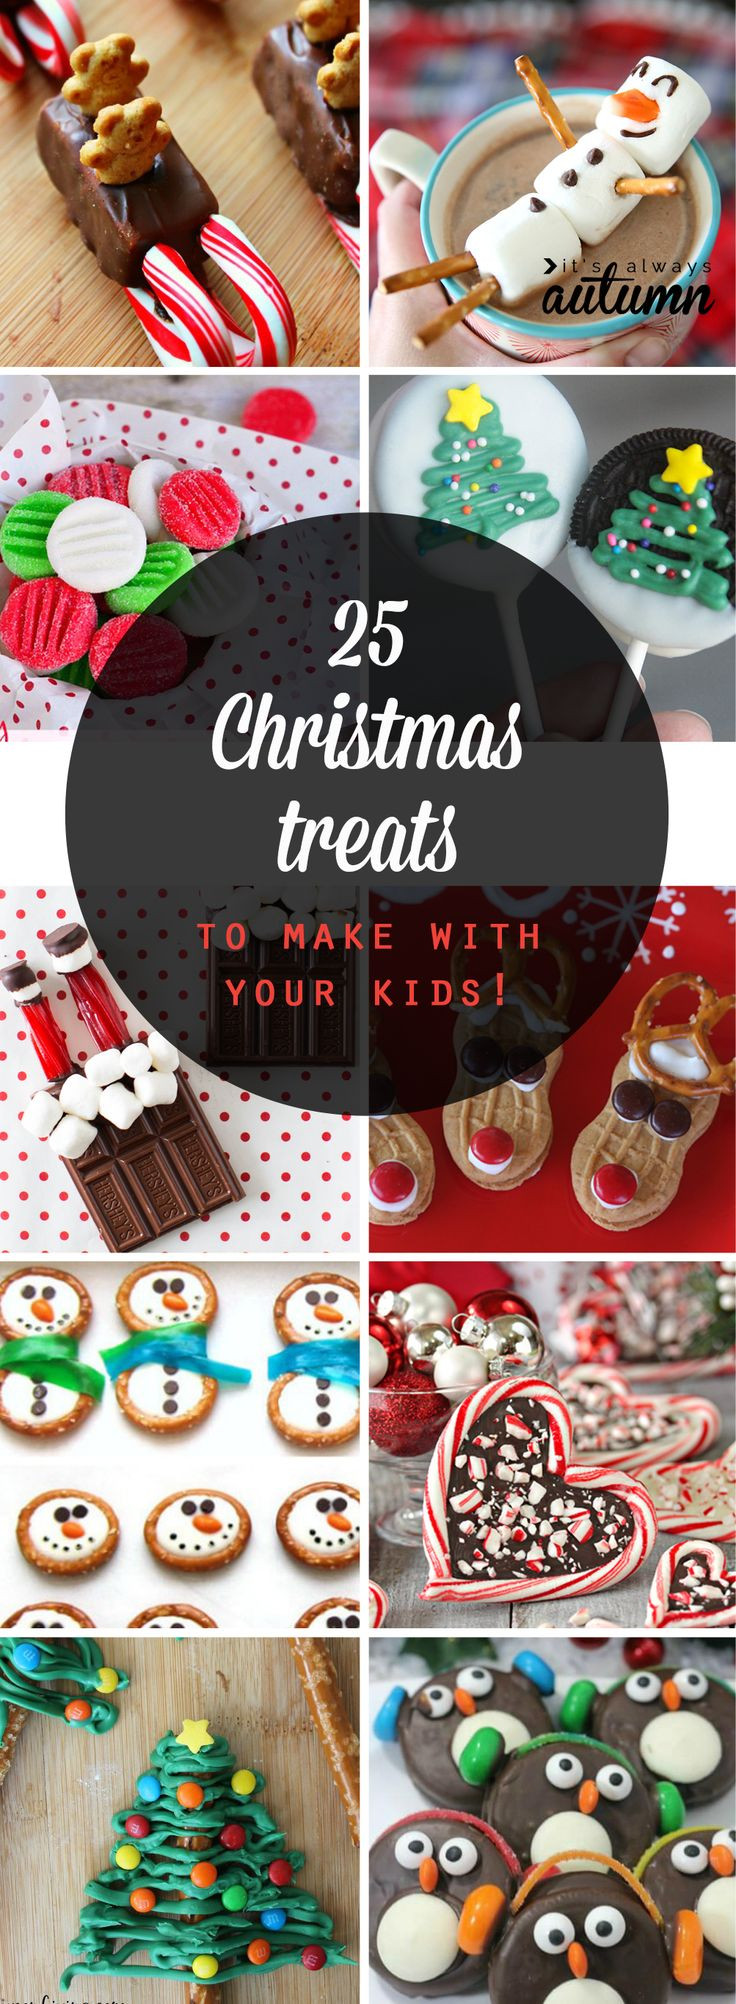 Christmas Candy For Kids
 25 best ideas about Christmas Treats on Pinterest